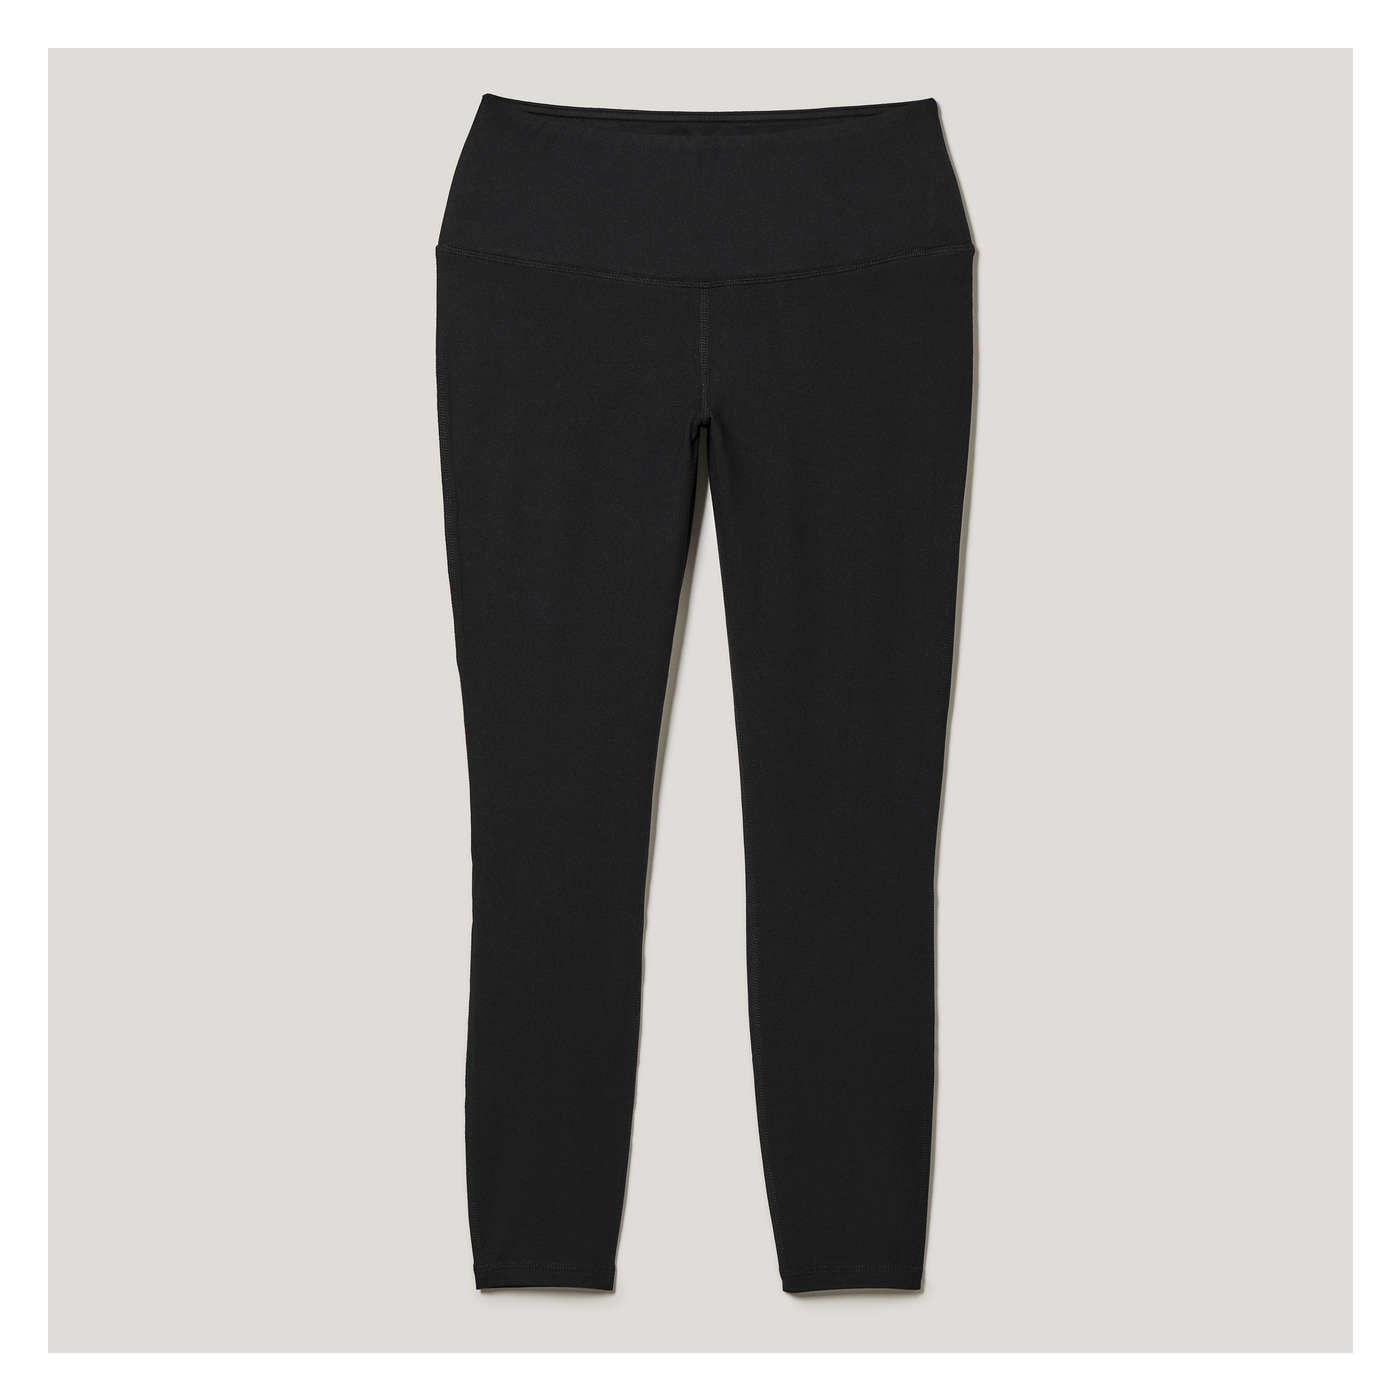 Yppss Joggers Pants for Women Comfy Leggings Solid Color Pants